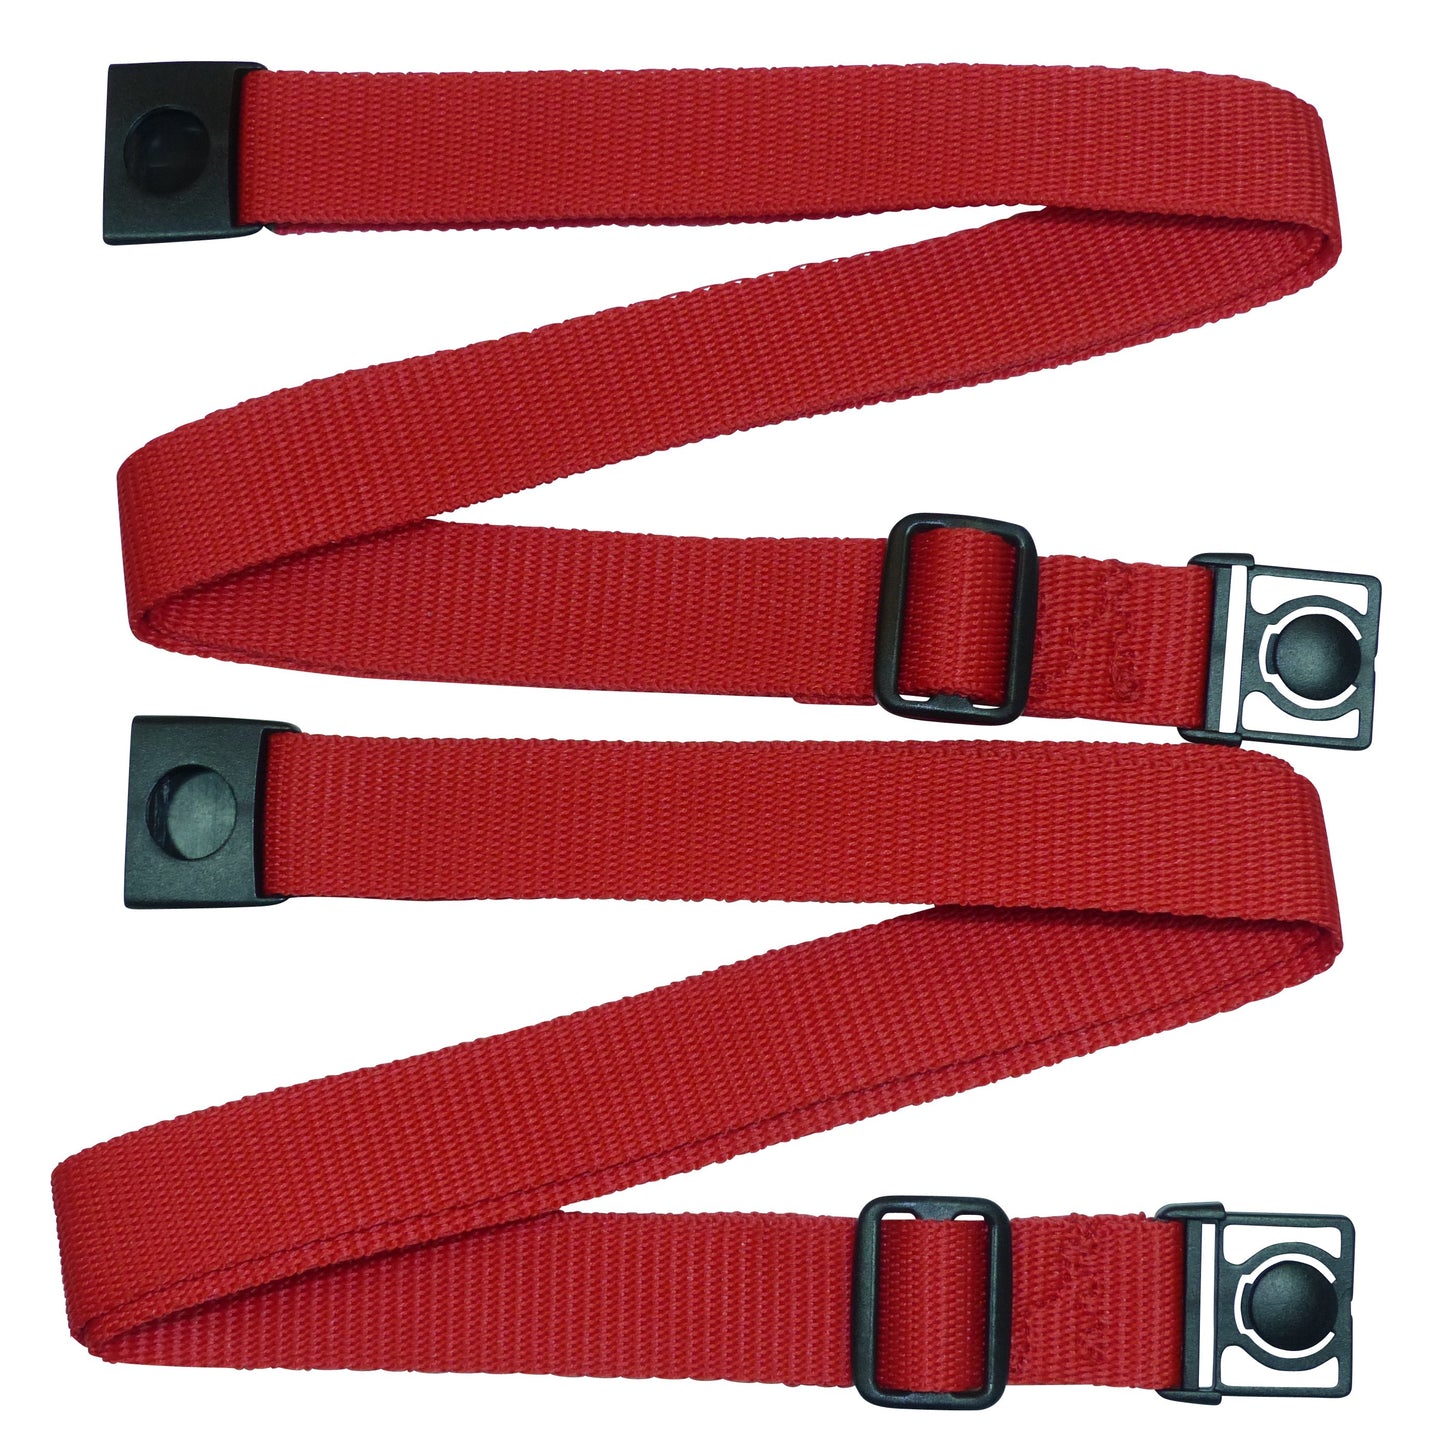 Benristraps 25mm Webbing Strap with Button Release and Triglide Slider Buckles (Pair) in Red